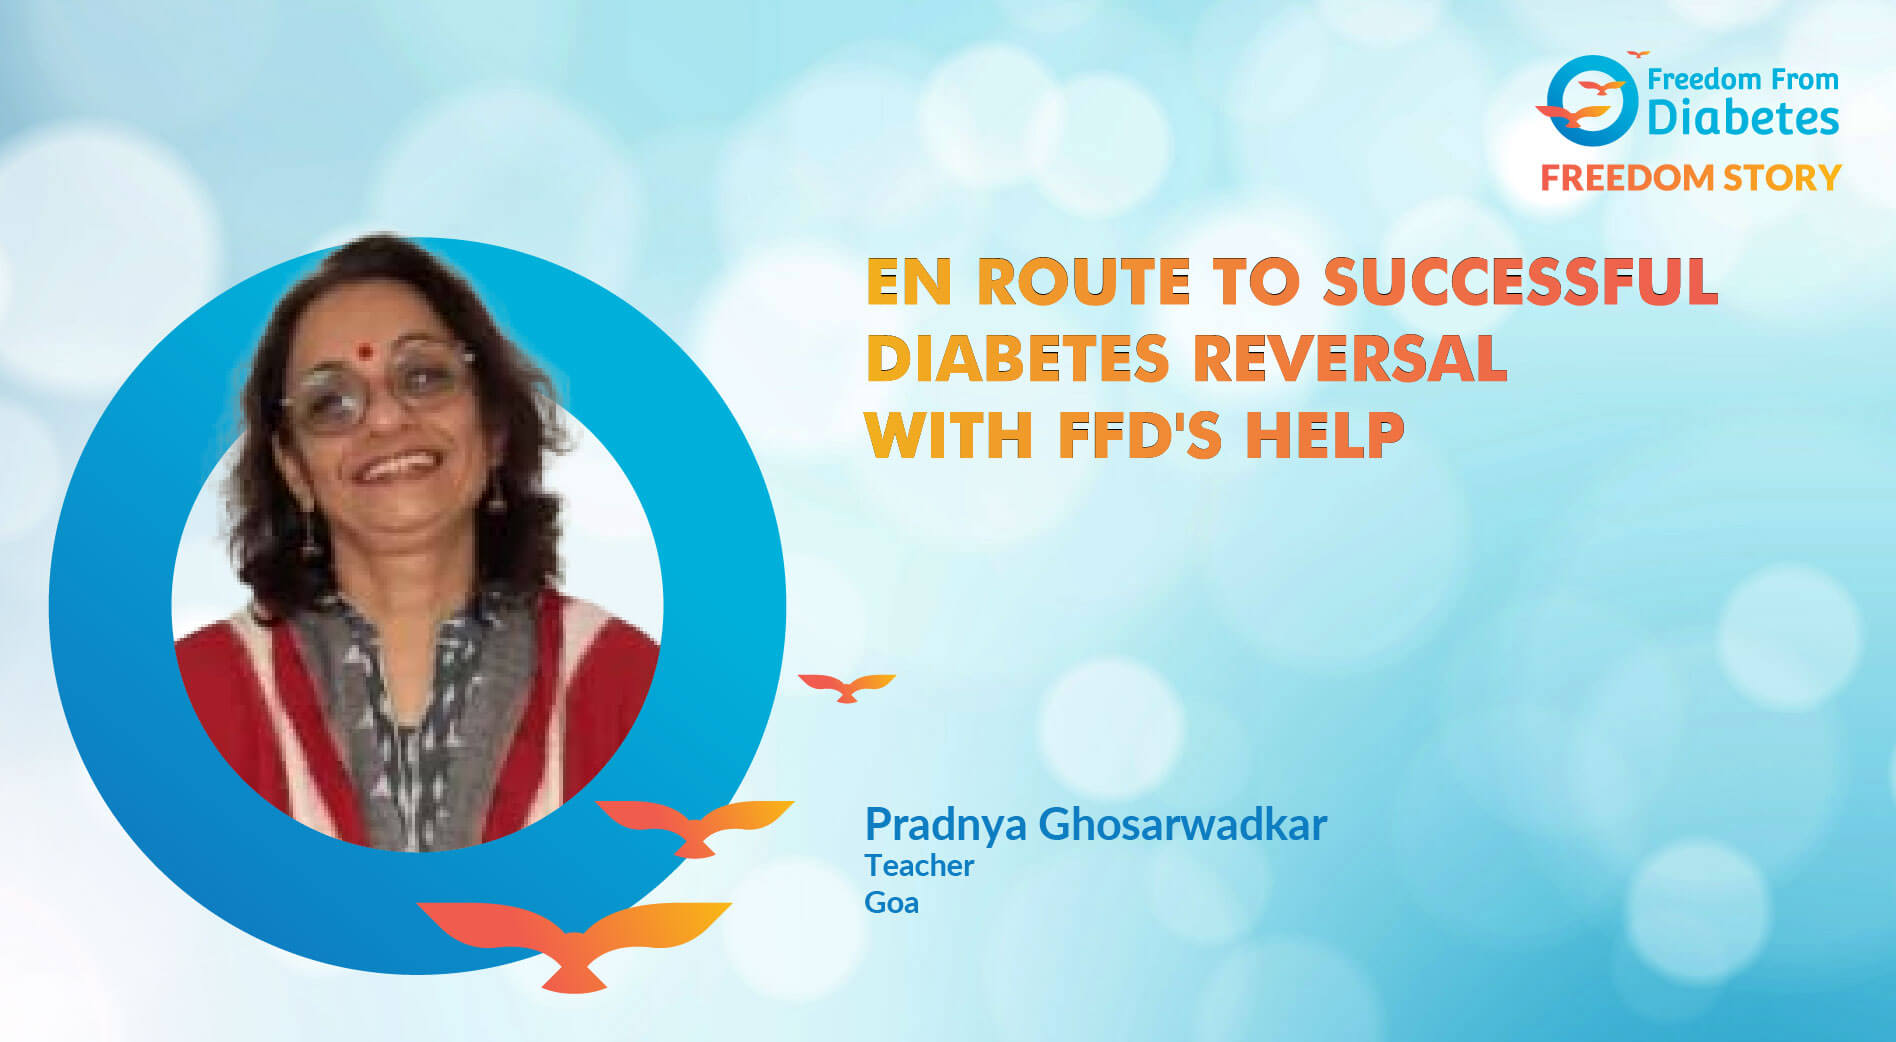 En route to successful diabetes reversal with FFD's help